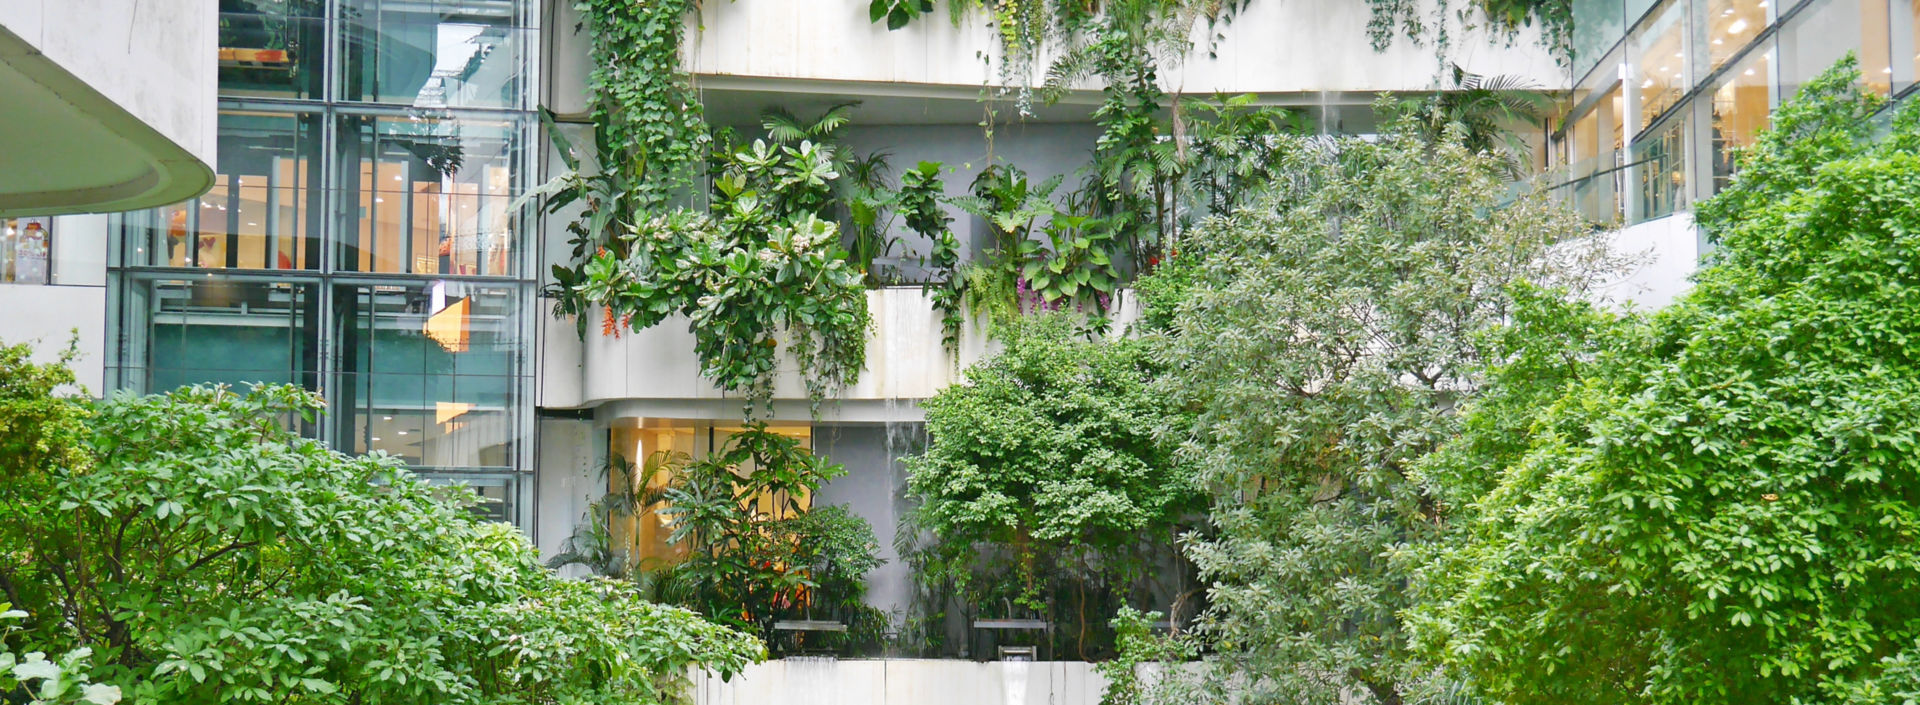 Vertical garden with green trees on the building.